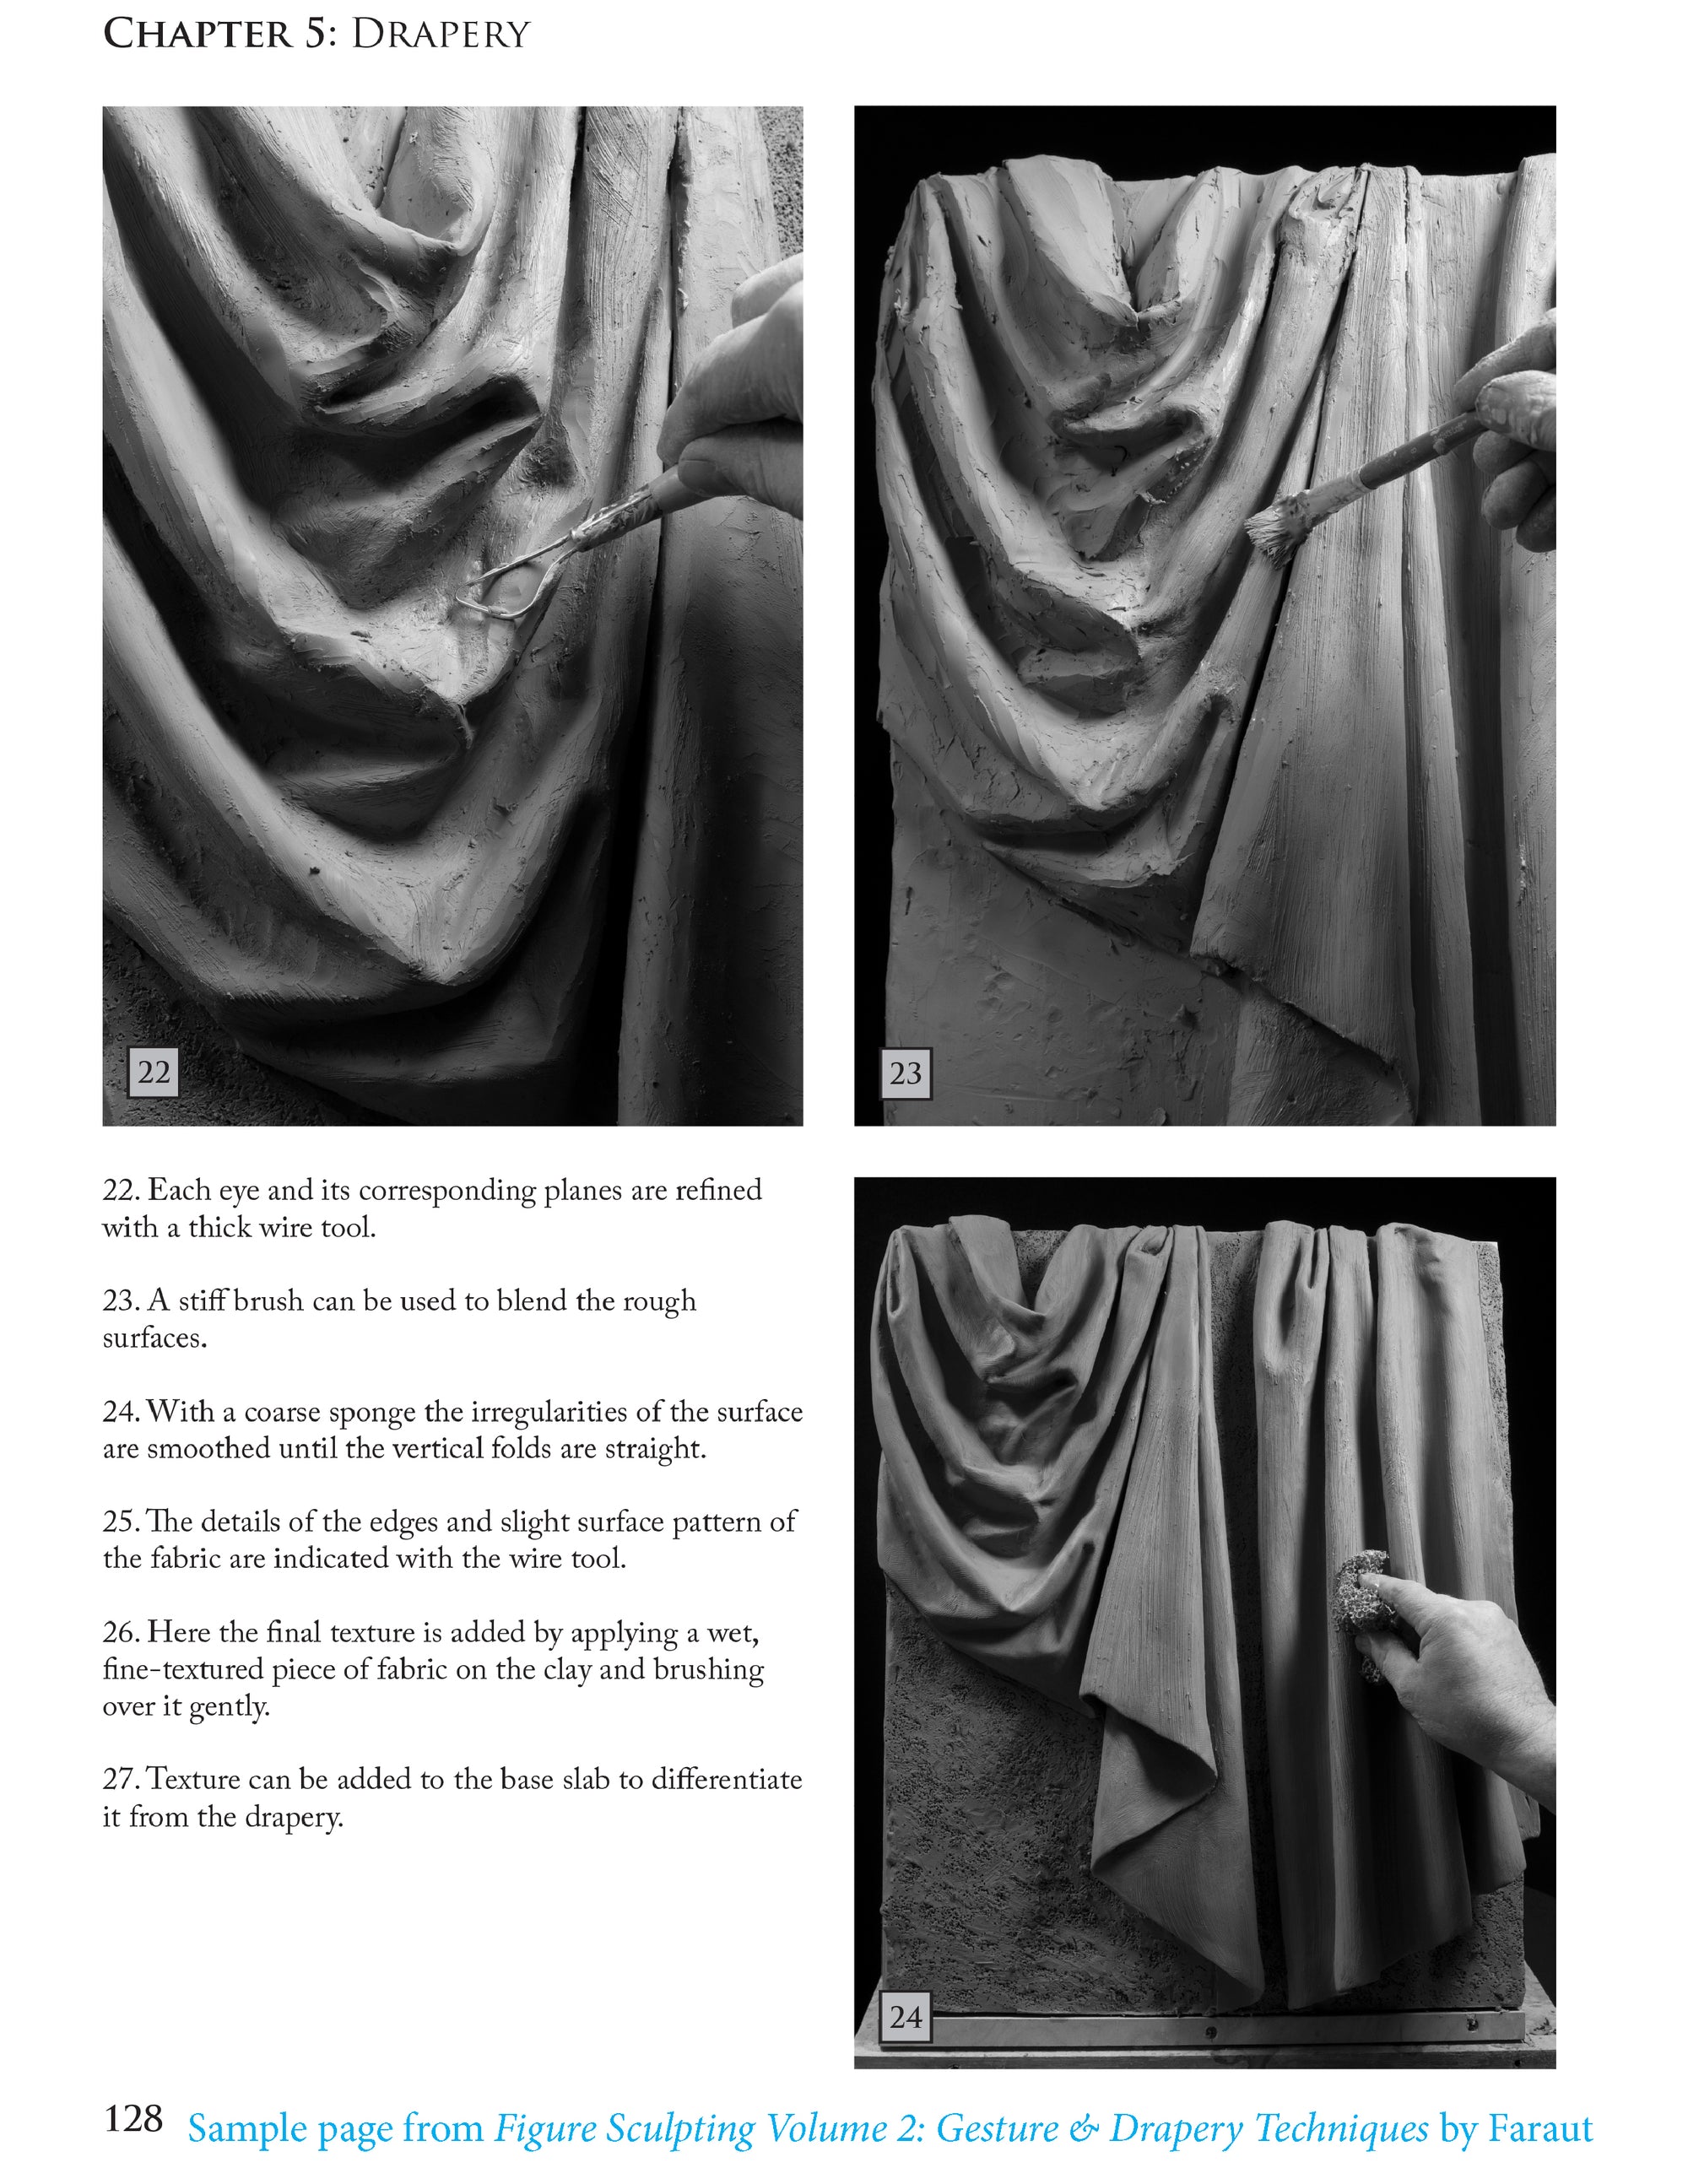  Sample page from book: Figure Sculpting Volume 2 by Faraut showing how to sculpt drapery